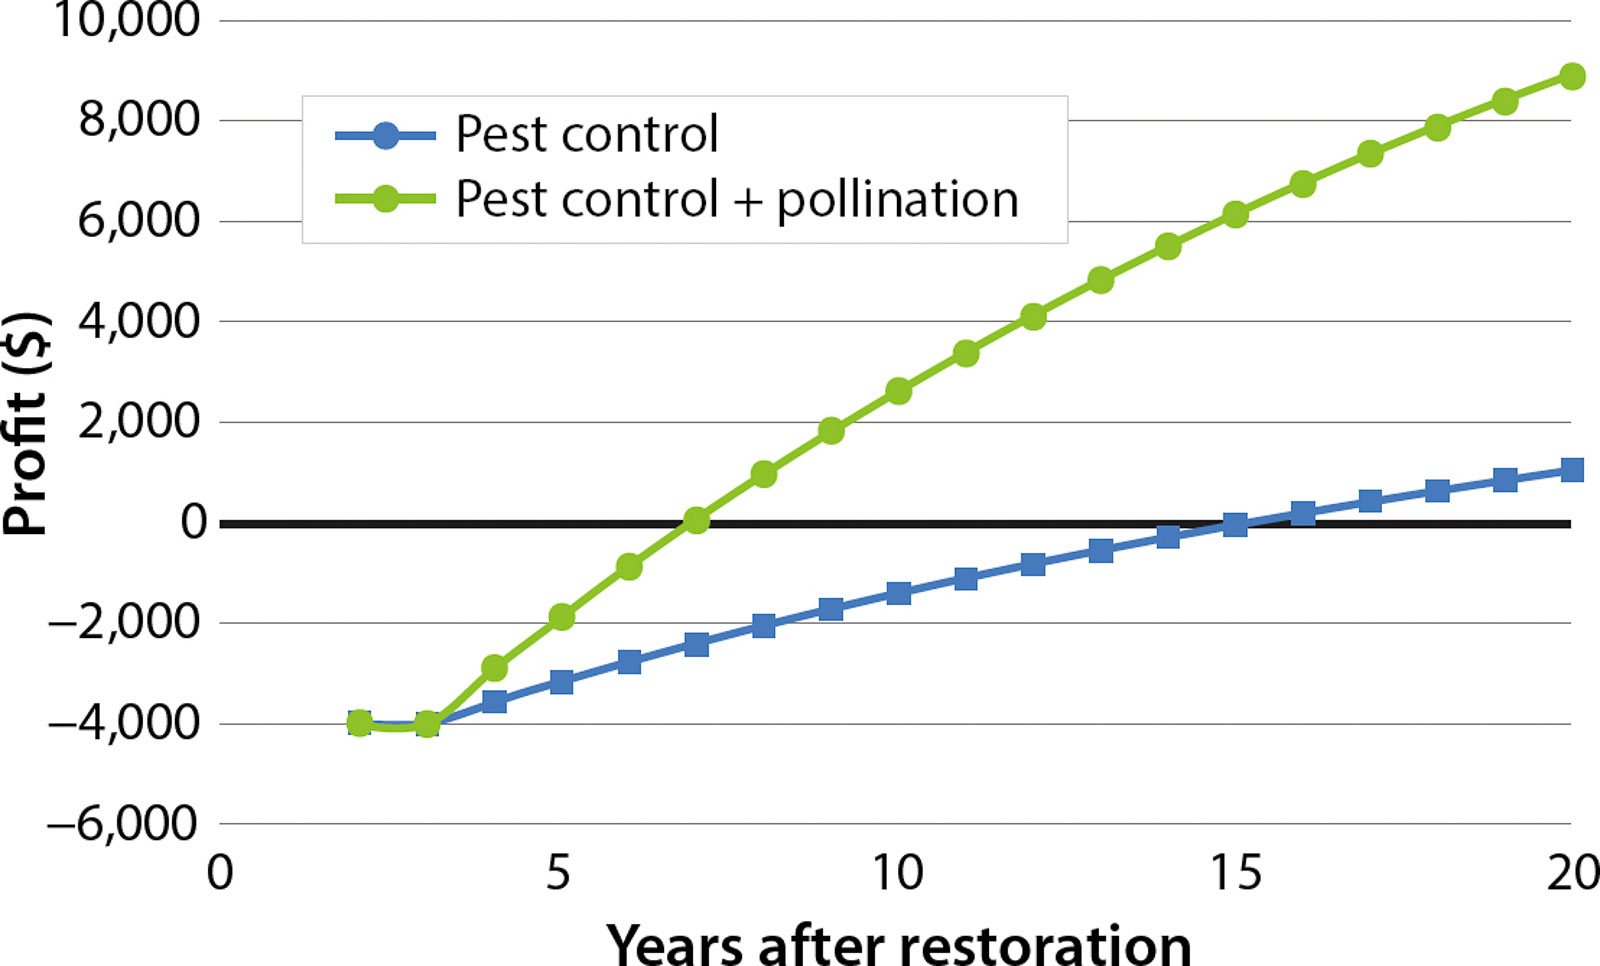 Hedgerow restoration studies showed the value of hedgerows in terms of their pest control and pollination benefits in rotational cropping systems (from Morandin et al 2016).